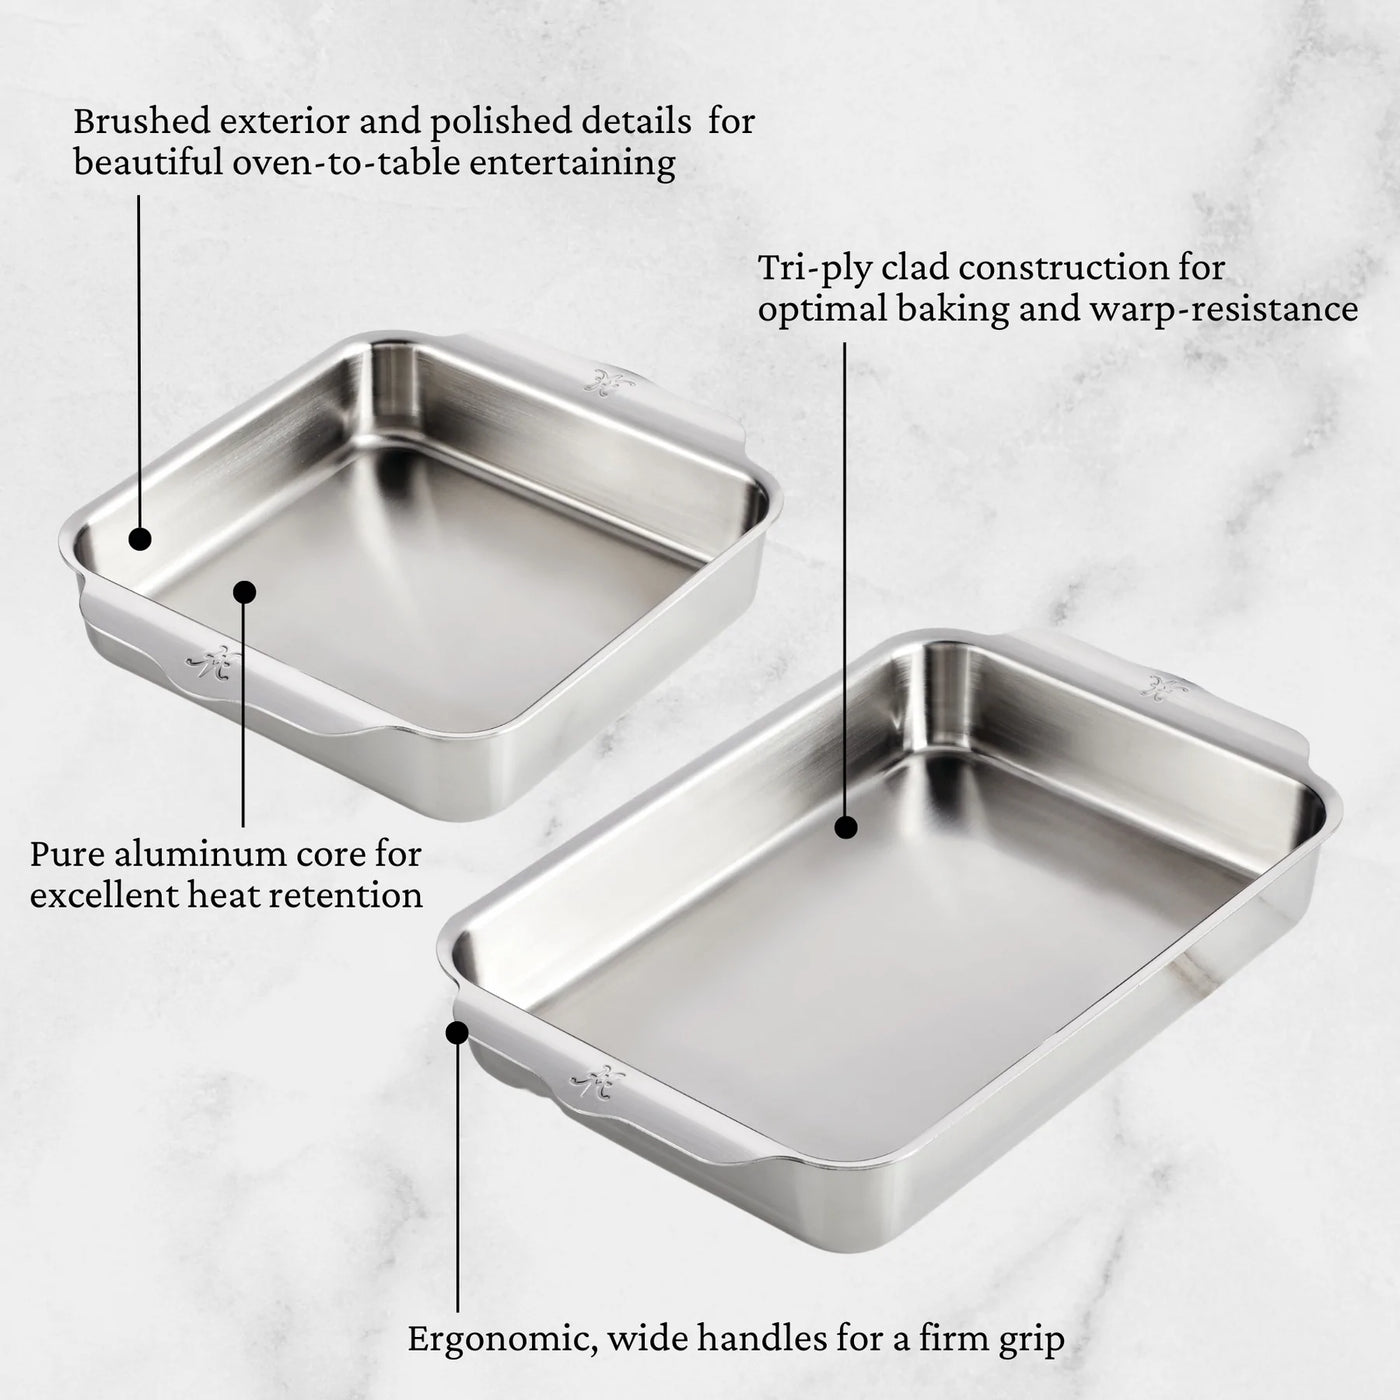 Hestan Provisions OvenBond Tri-ply Set 2 Half Sheet Pans and 2 Stainless  Steel Racks, Set of 4